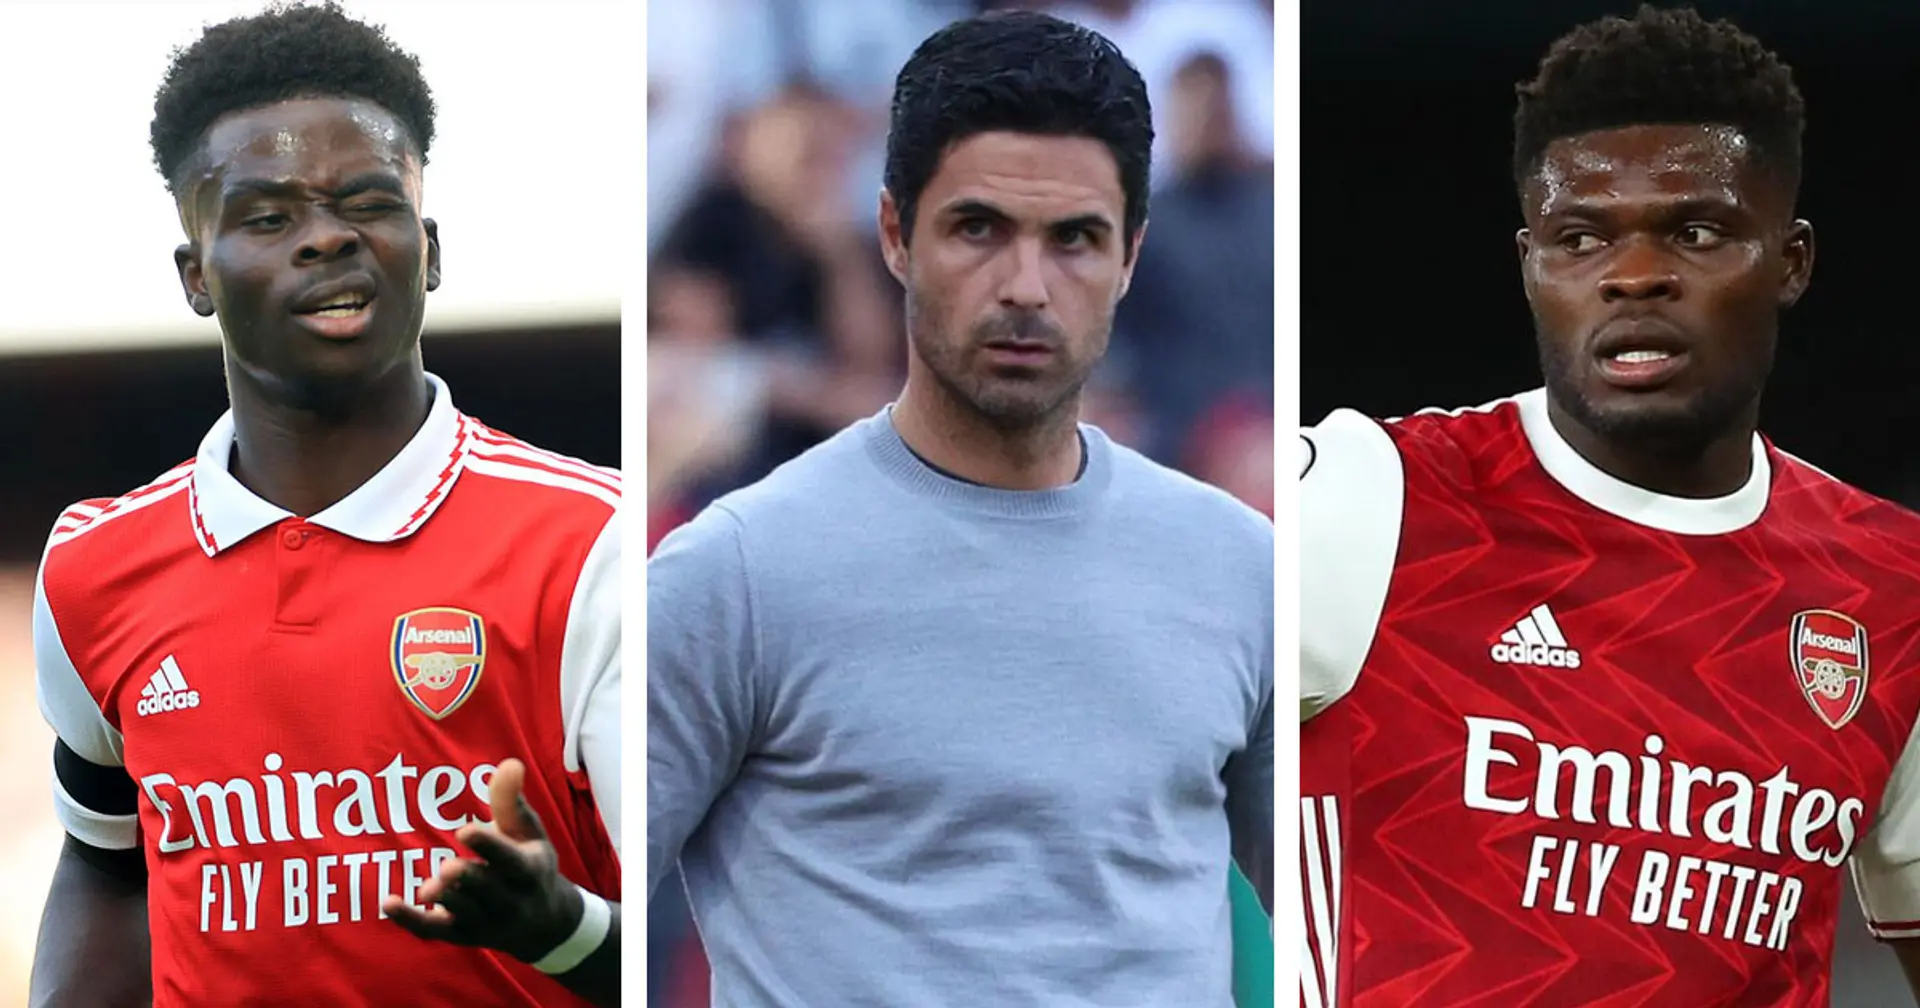 No Partey or Odegaard: Arsenal players with most appearances under Arteta on his third anniversary as manager